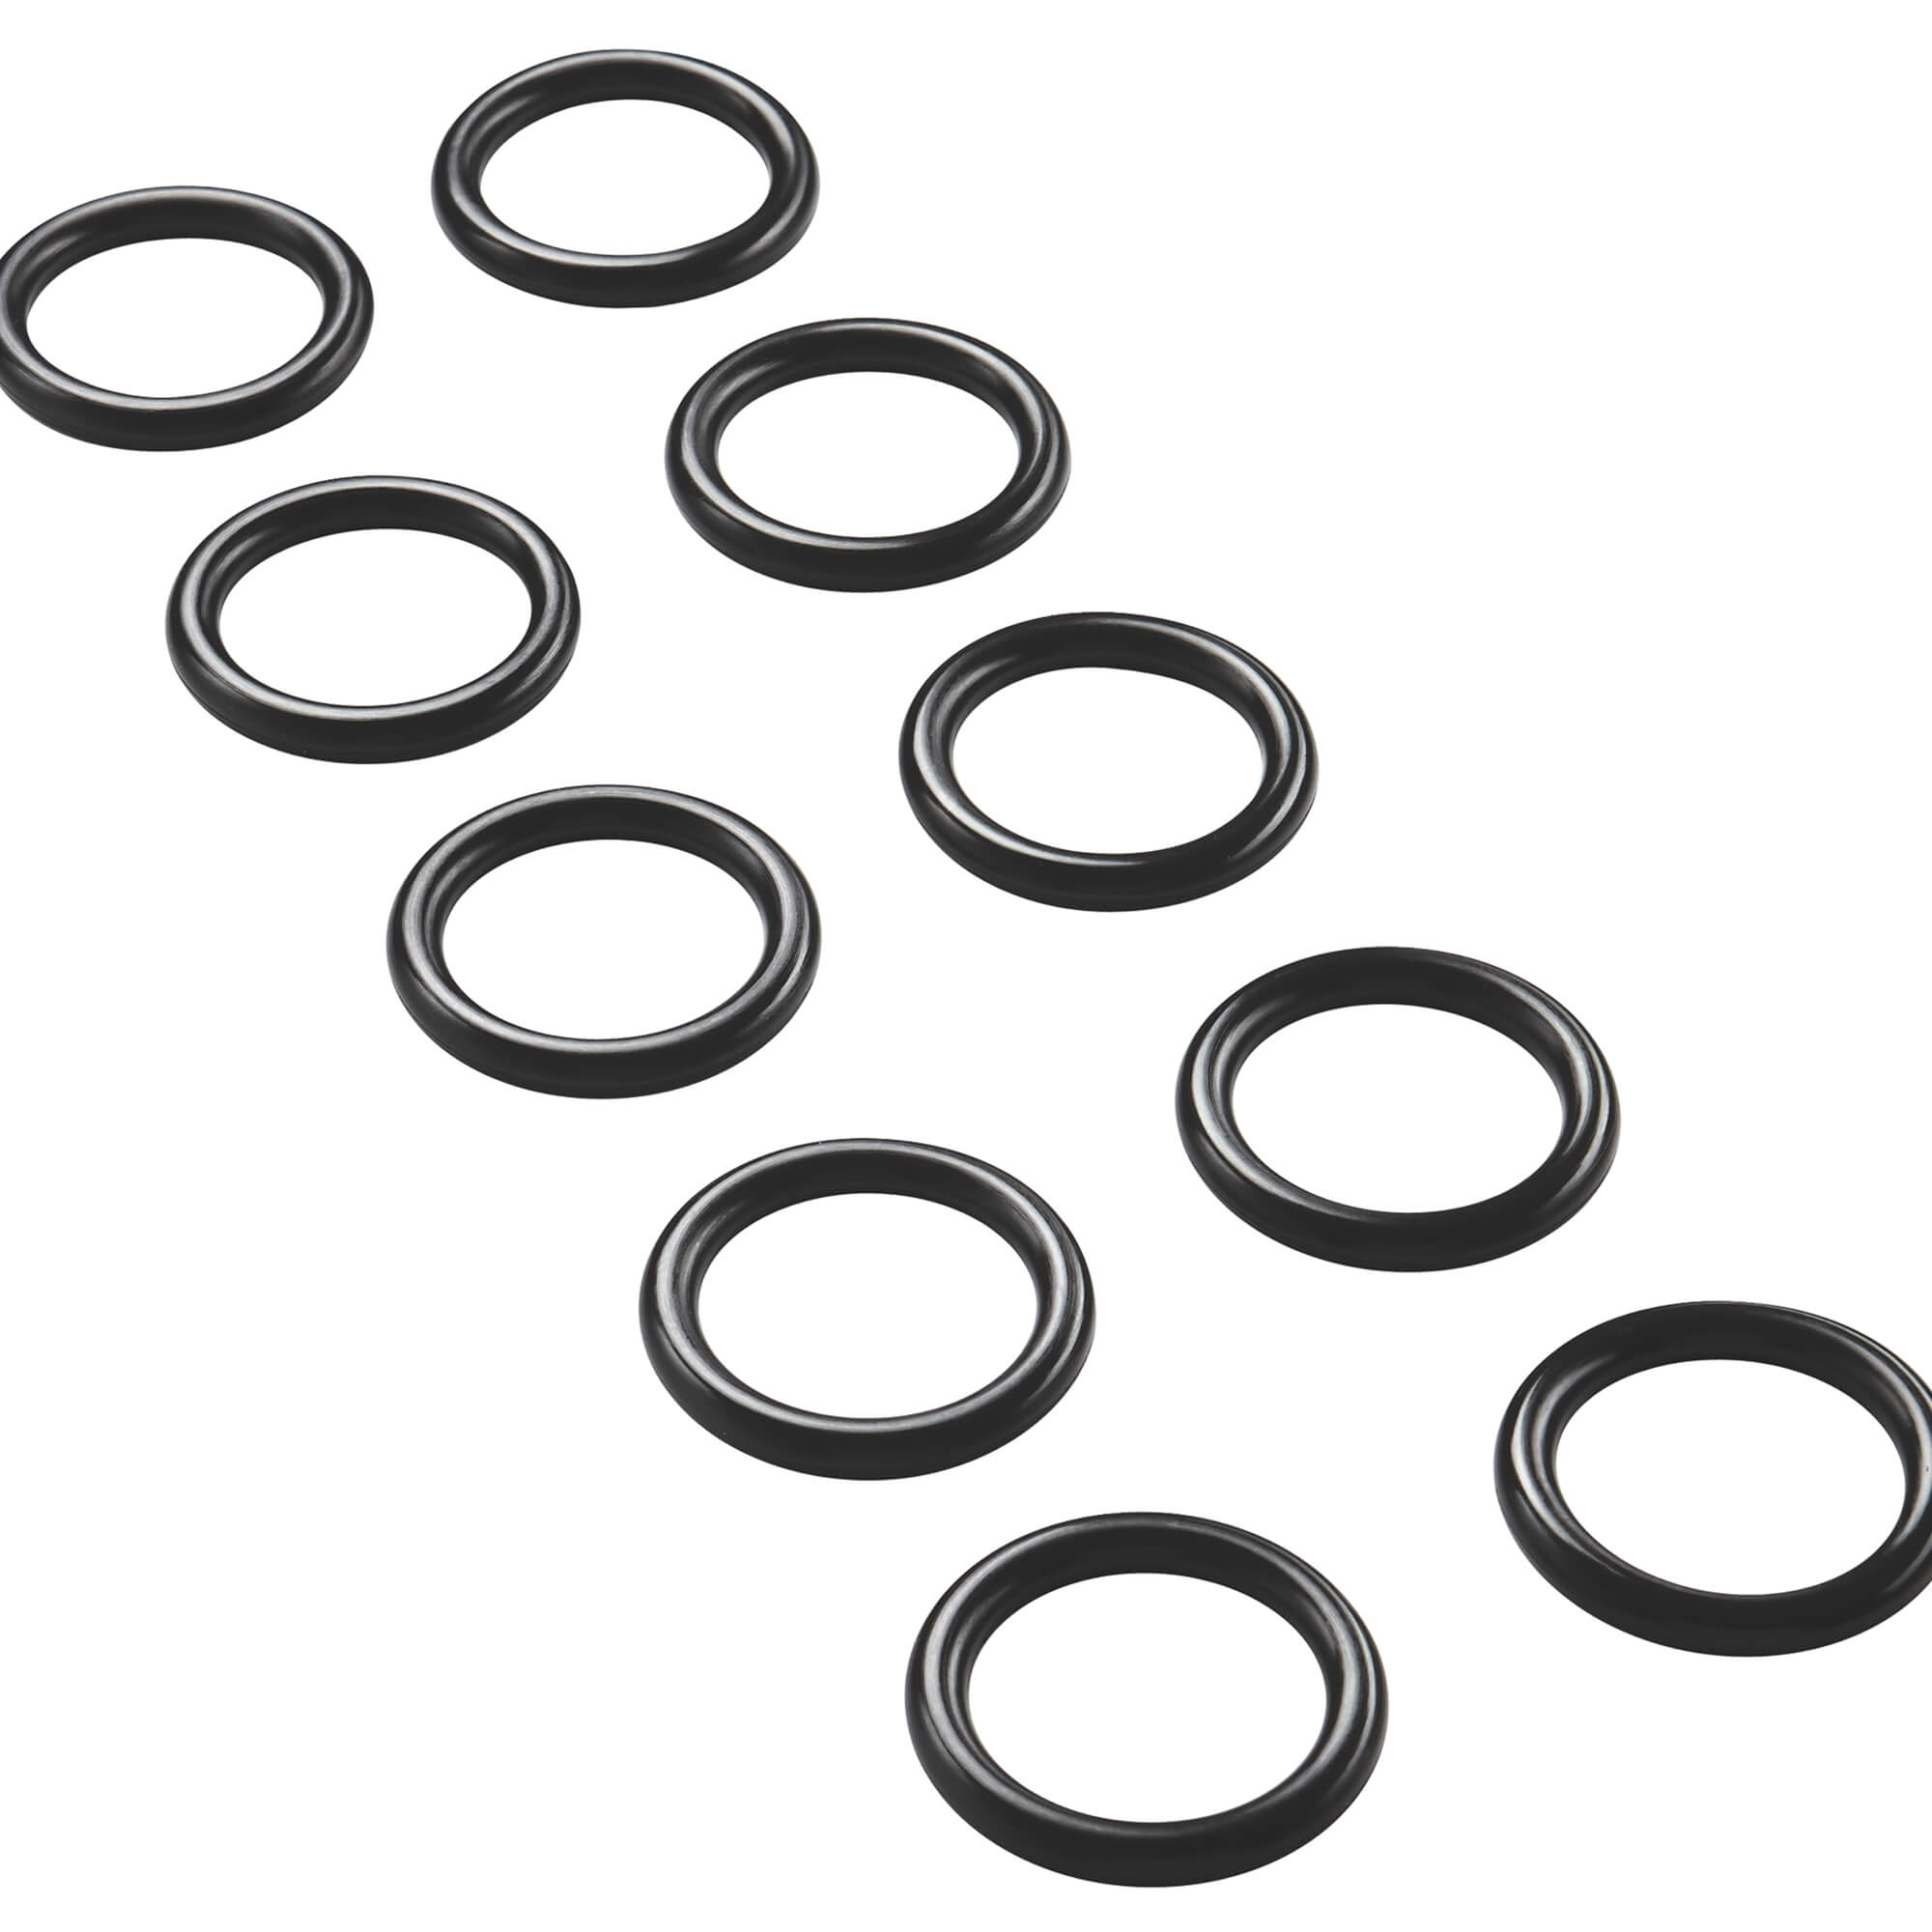 GROHE Replacement Seals o-Ring for Flowmeter Grohe 4376900M 4005176159237 